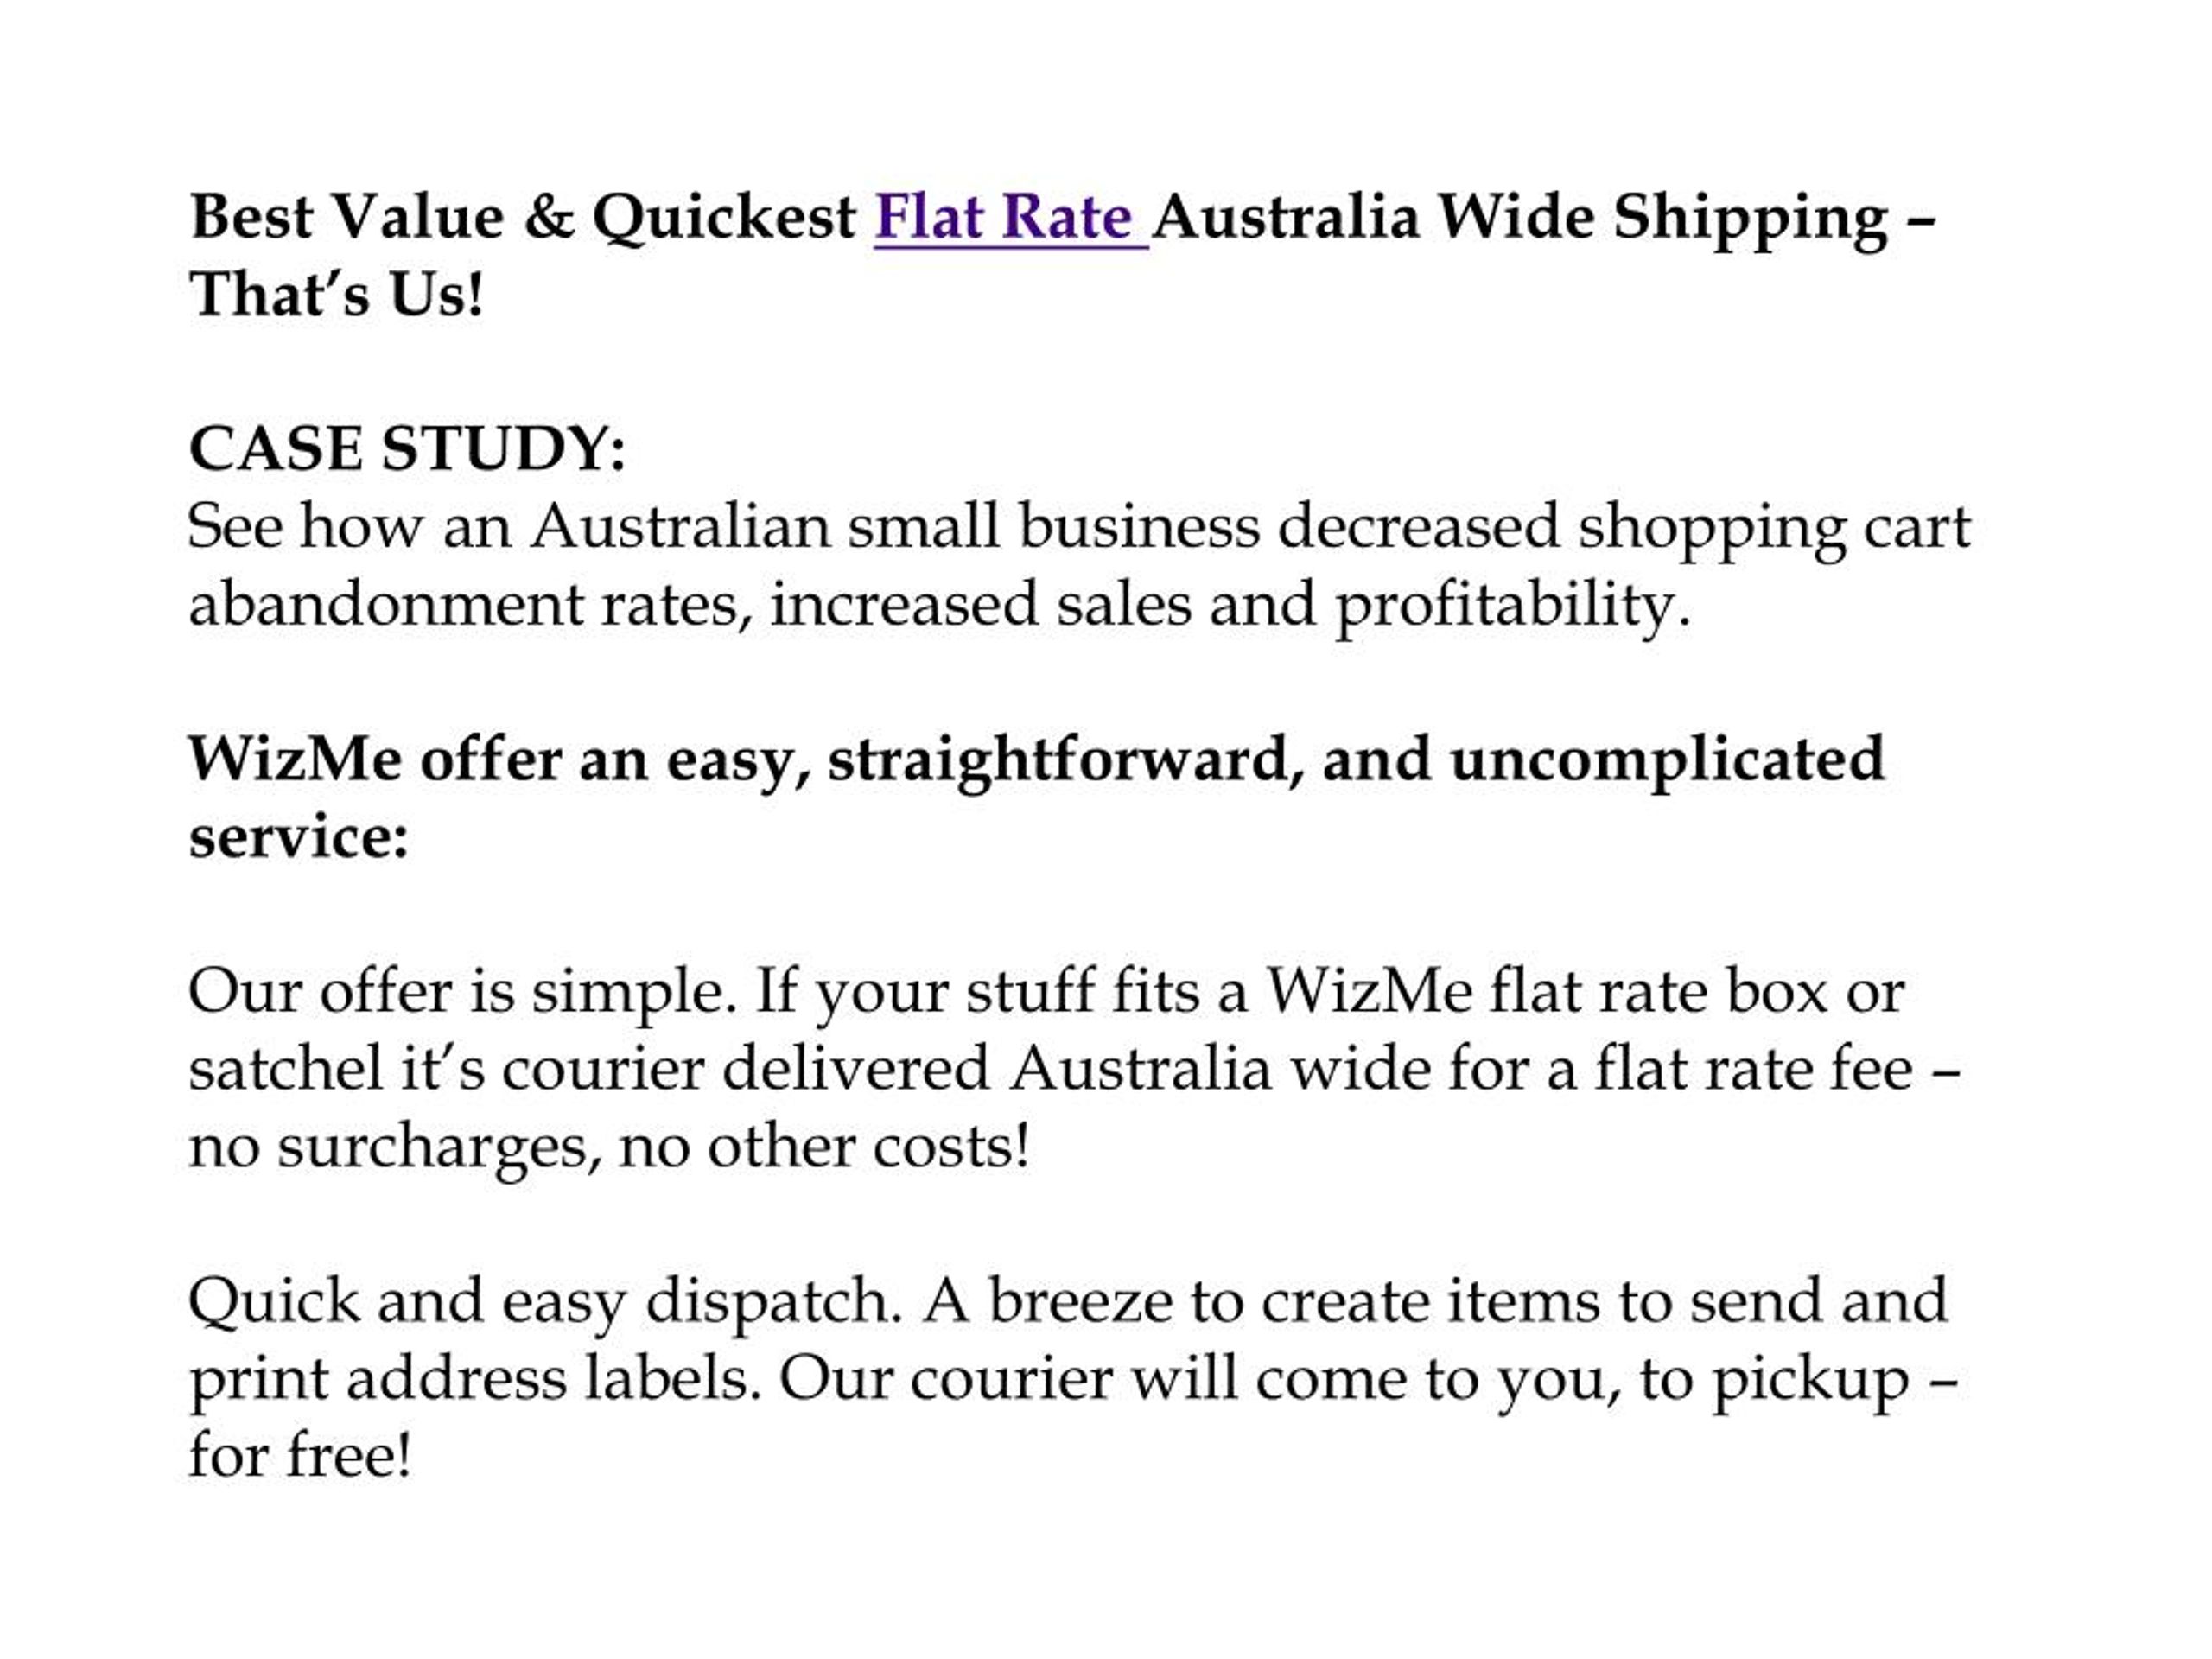 PPT - WizMe Case Study: Australia Wide Flat Rate Boxes and Flat Rate ...